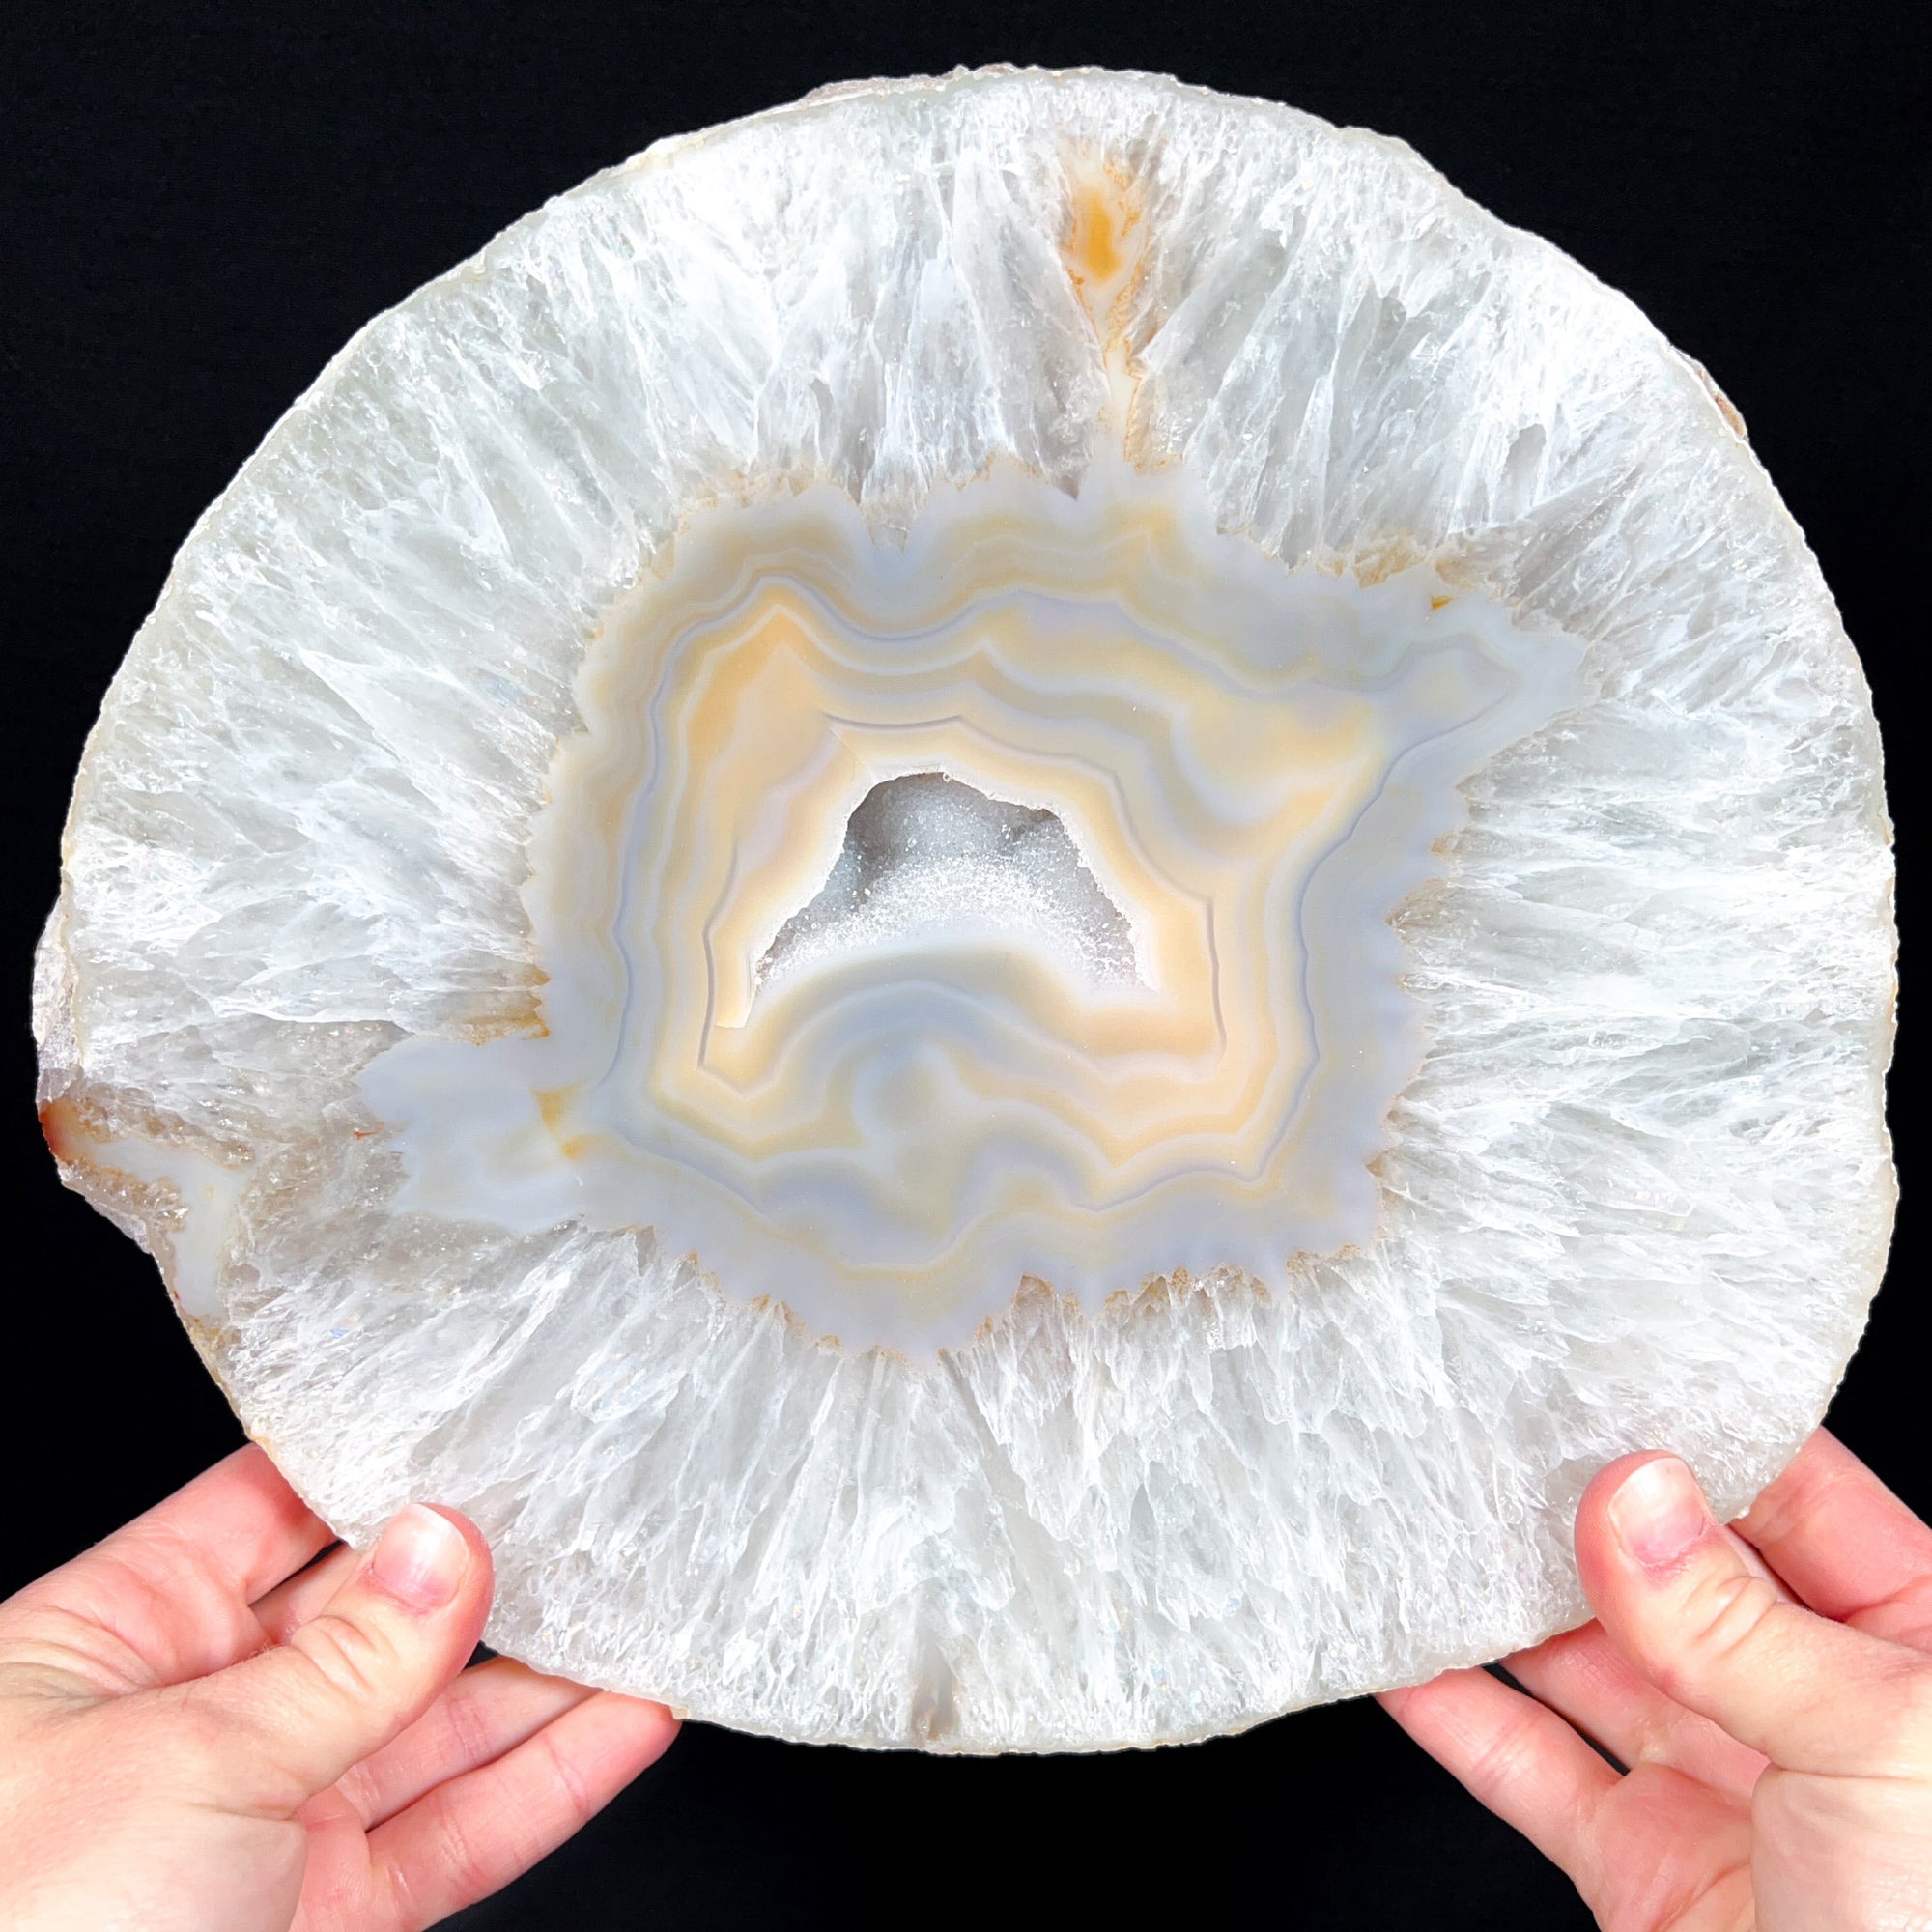 Large Geode Slice with Quartz and Agate Crystals